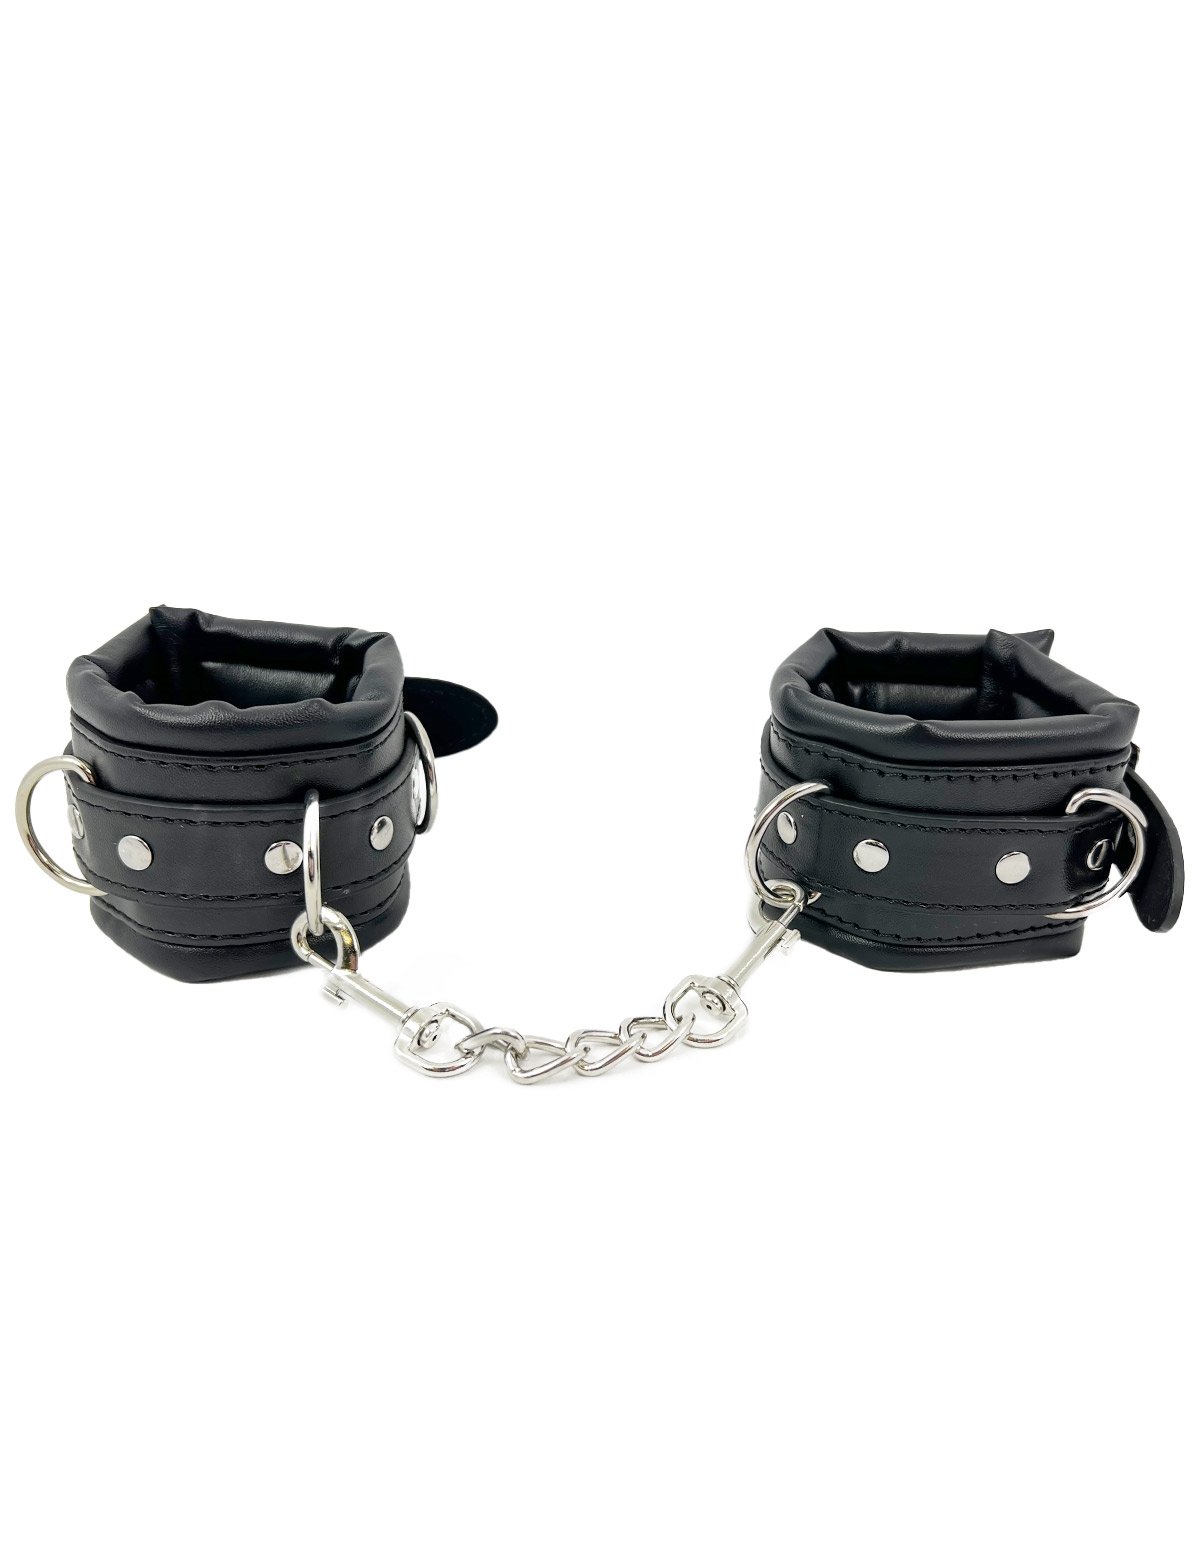 alternate image for Lovers Pain Padded Handcuffs